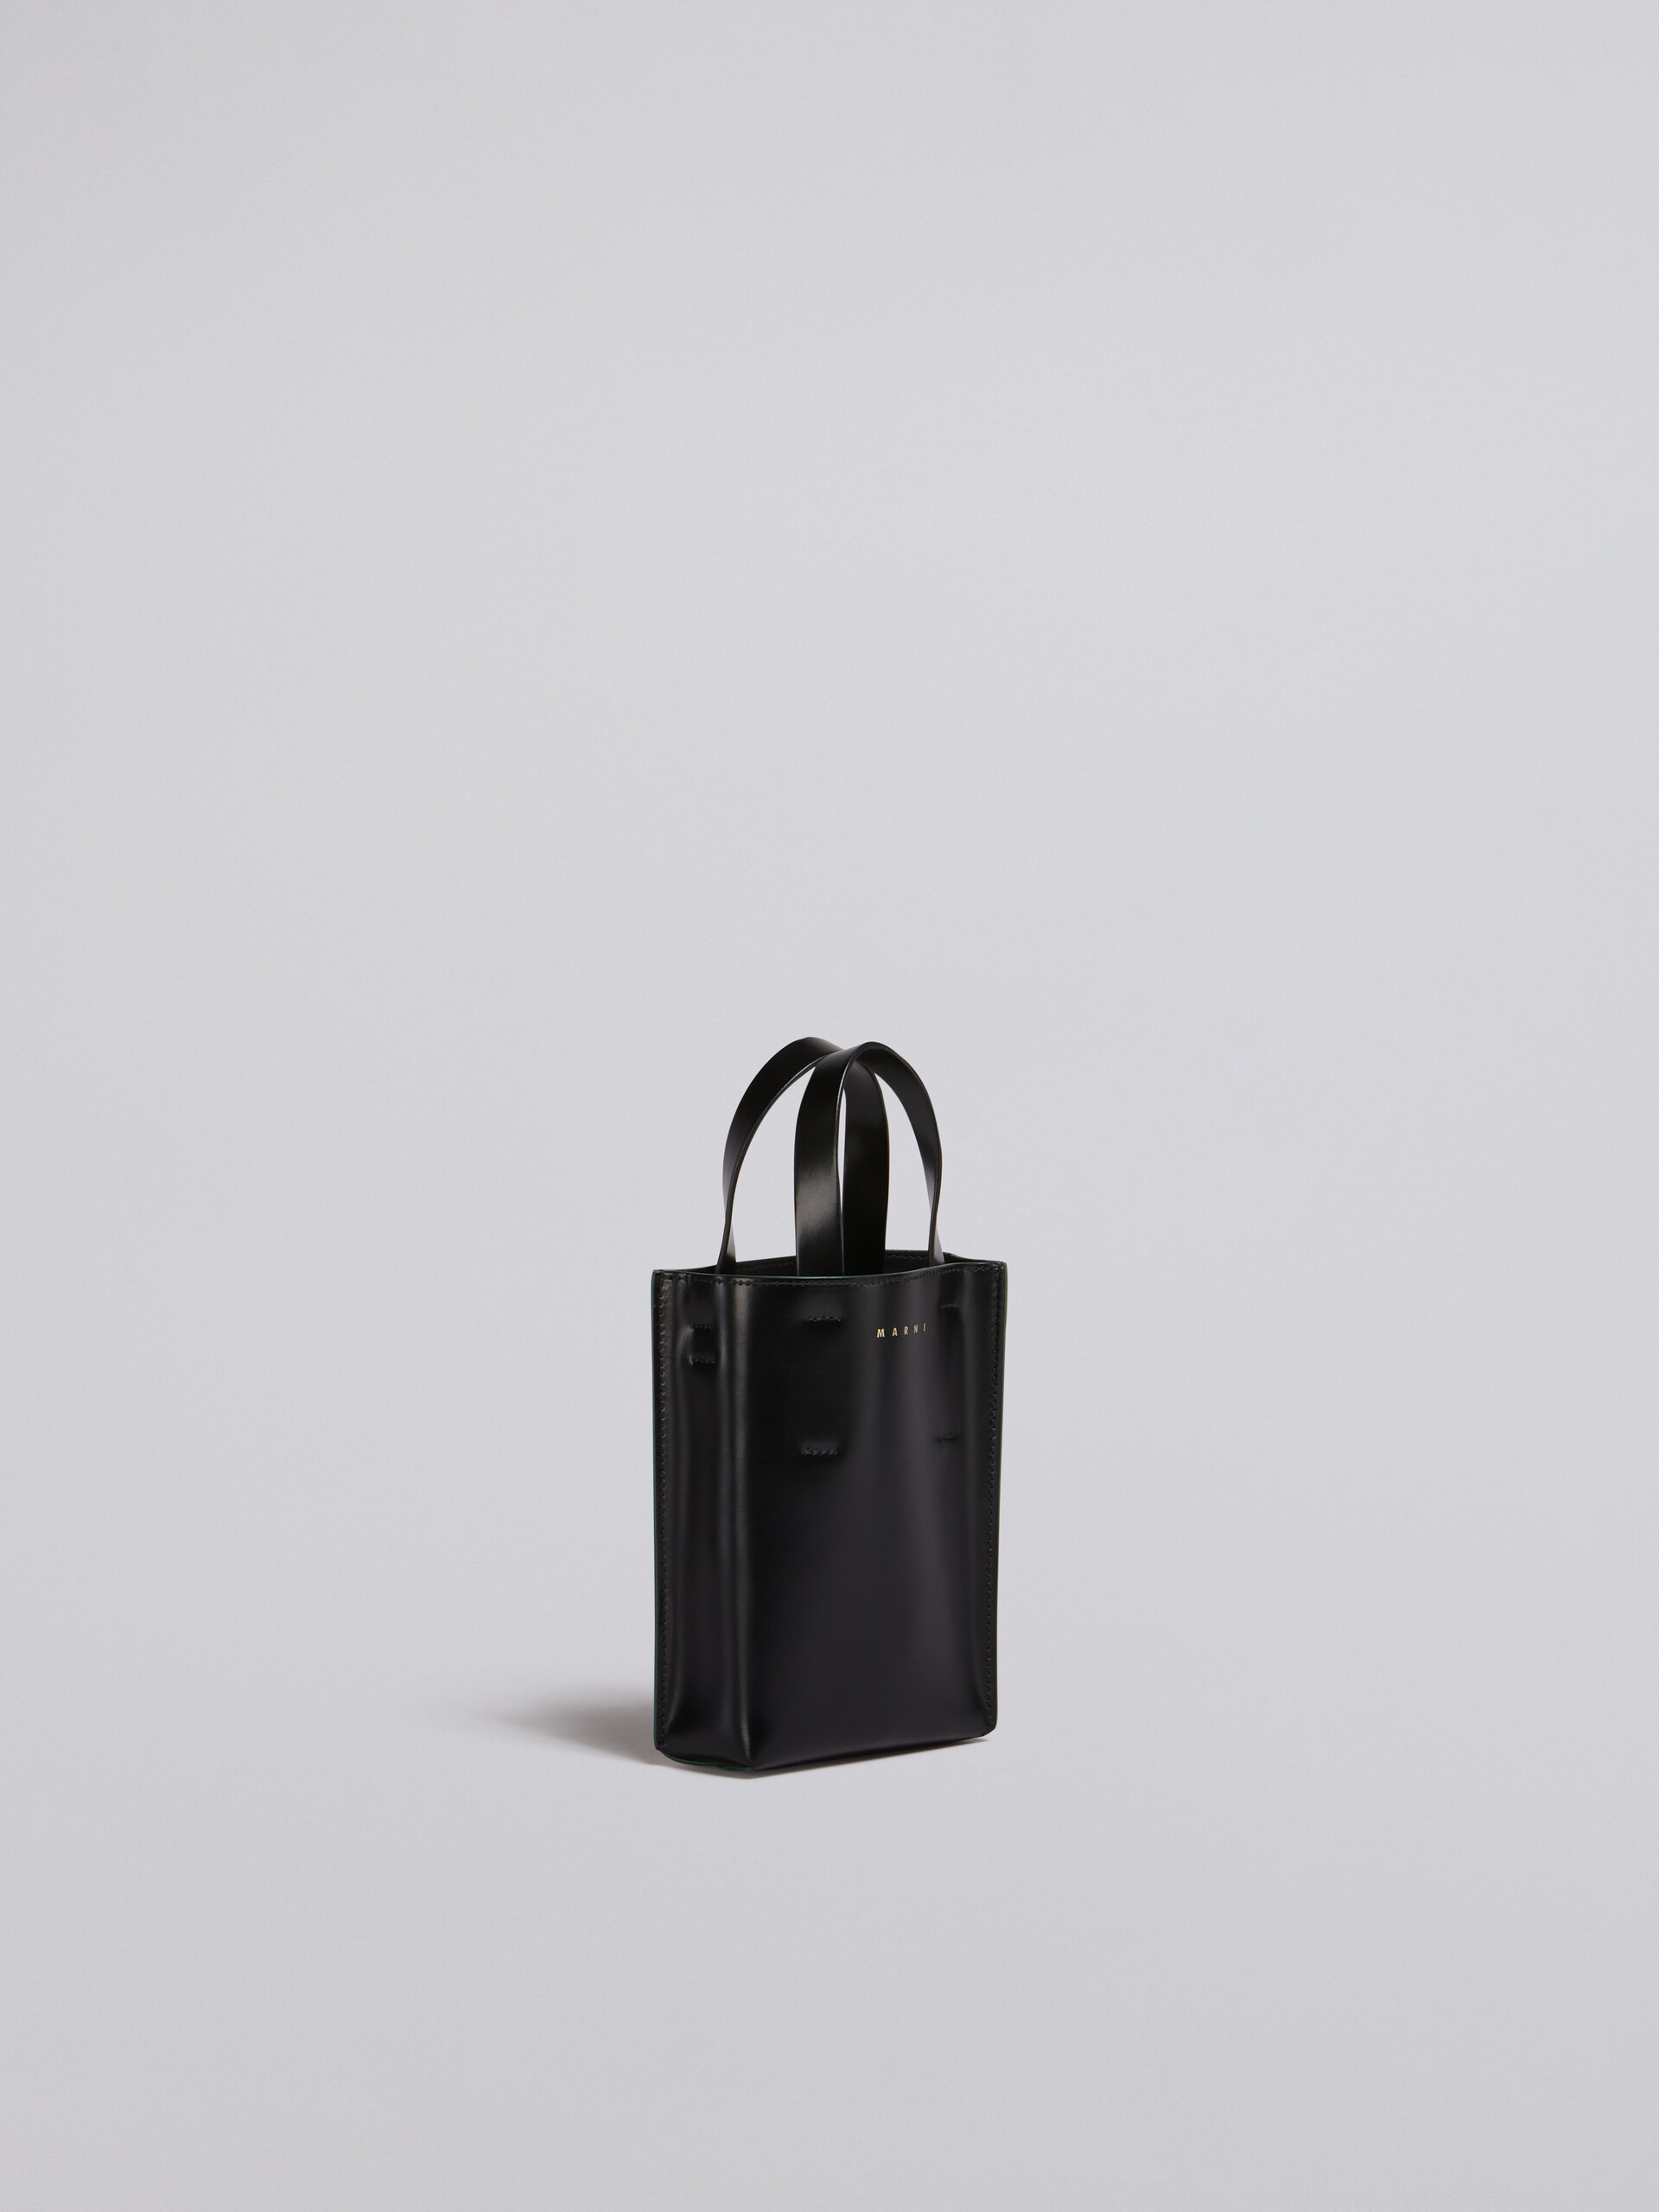 Nano MUSEO shopping bag in black shiny smooth calfskin with shoulder strap - Shopping Bags - Image 5